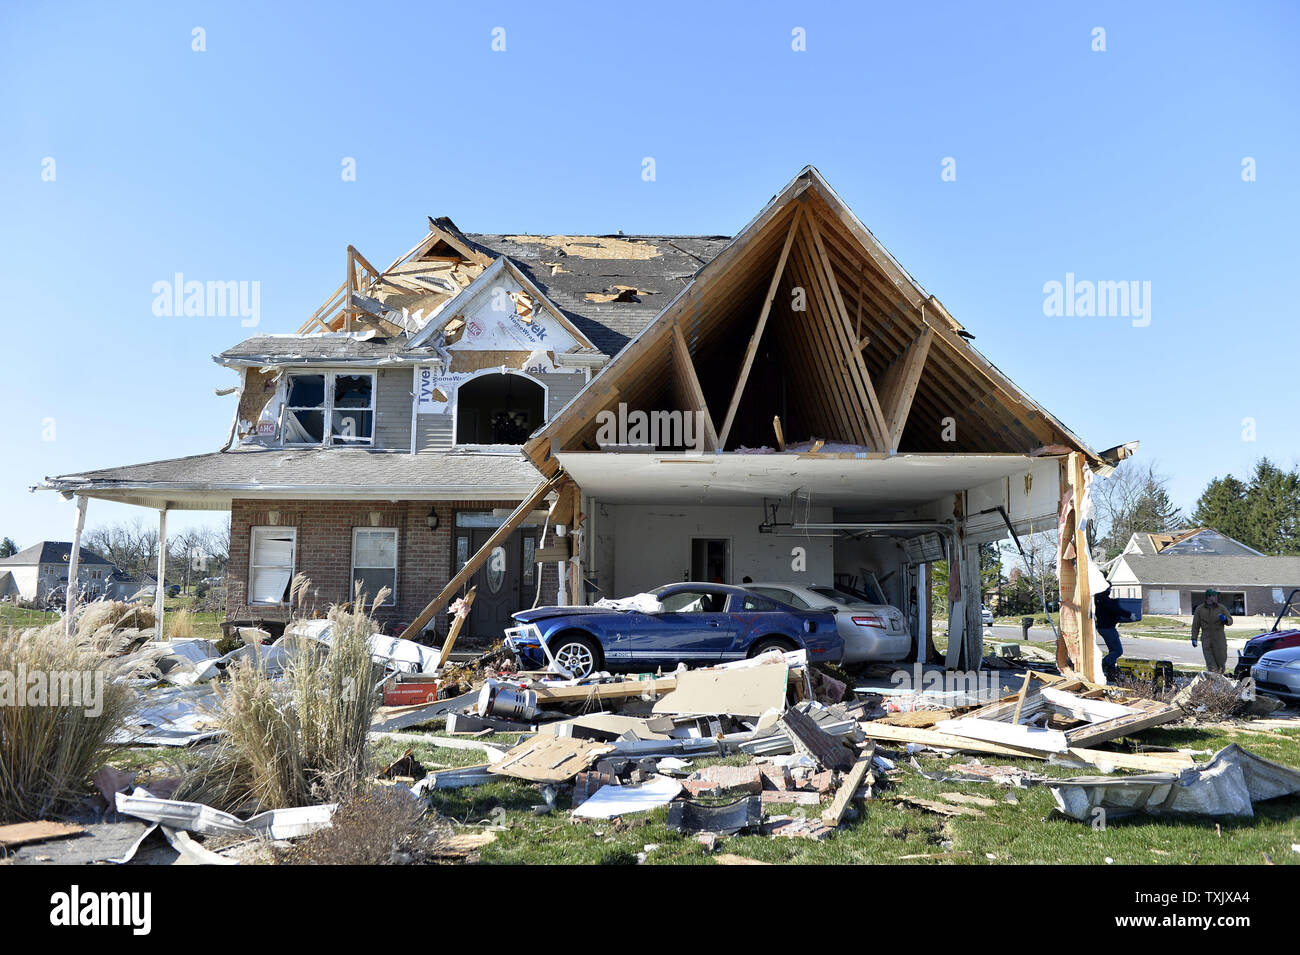 A severely damaged home stands in Washington, Illinois on November 18, 2013. Six people died and hundreds of homes were destroyed in Illinois as 81 tornadoes were sighted on November 17 throughout 12 midwest states including the EF4 tornado that struck Washington, Illinois.     UPI/Brian Kersey.     UPI/Brian Kersey Stock Photo